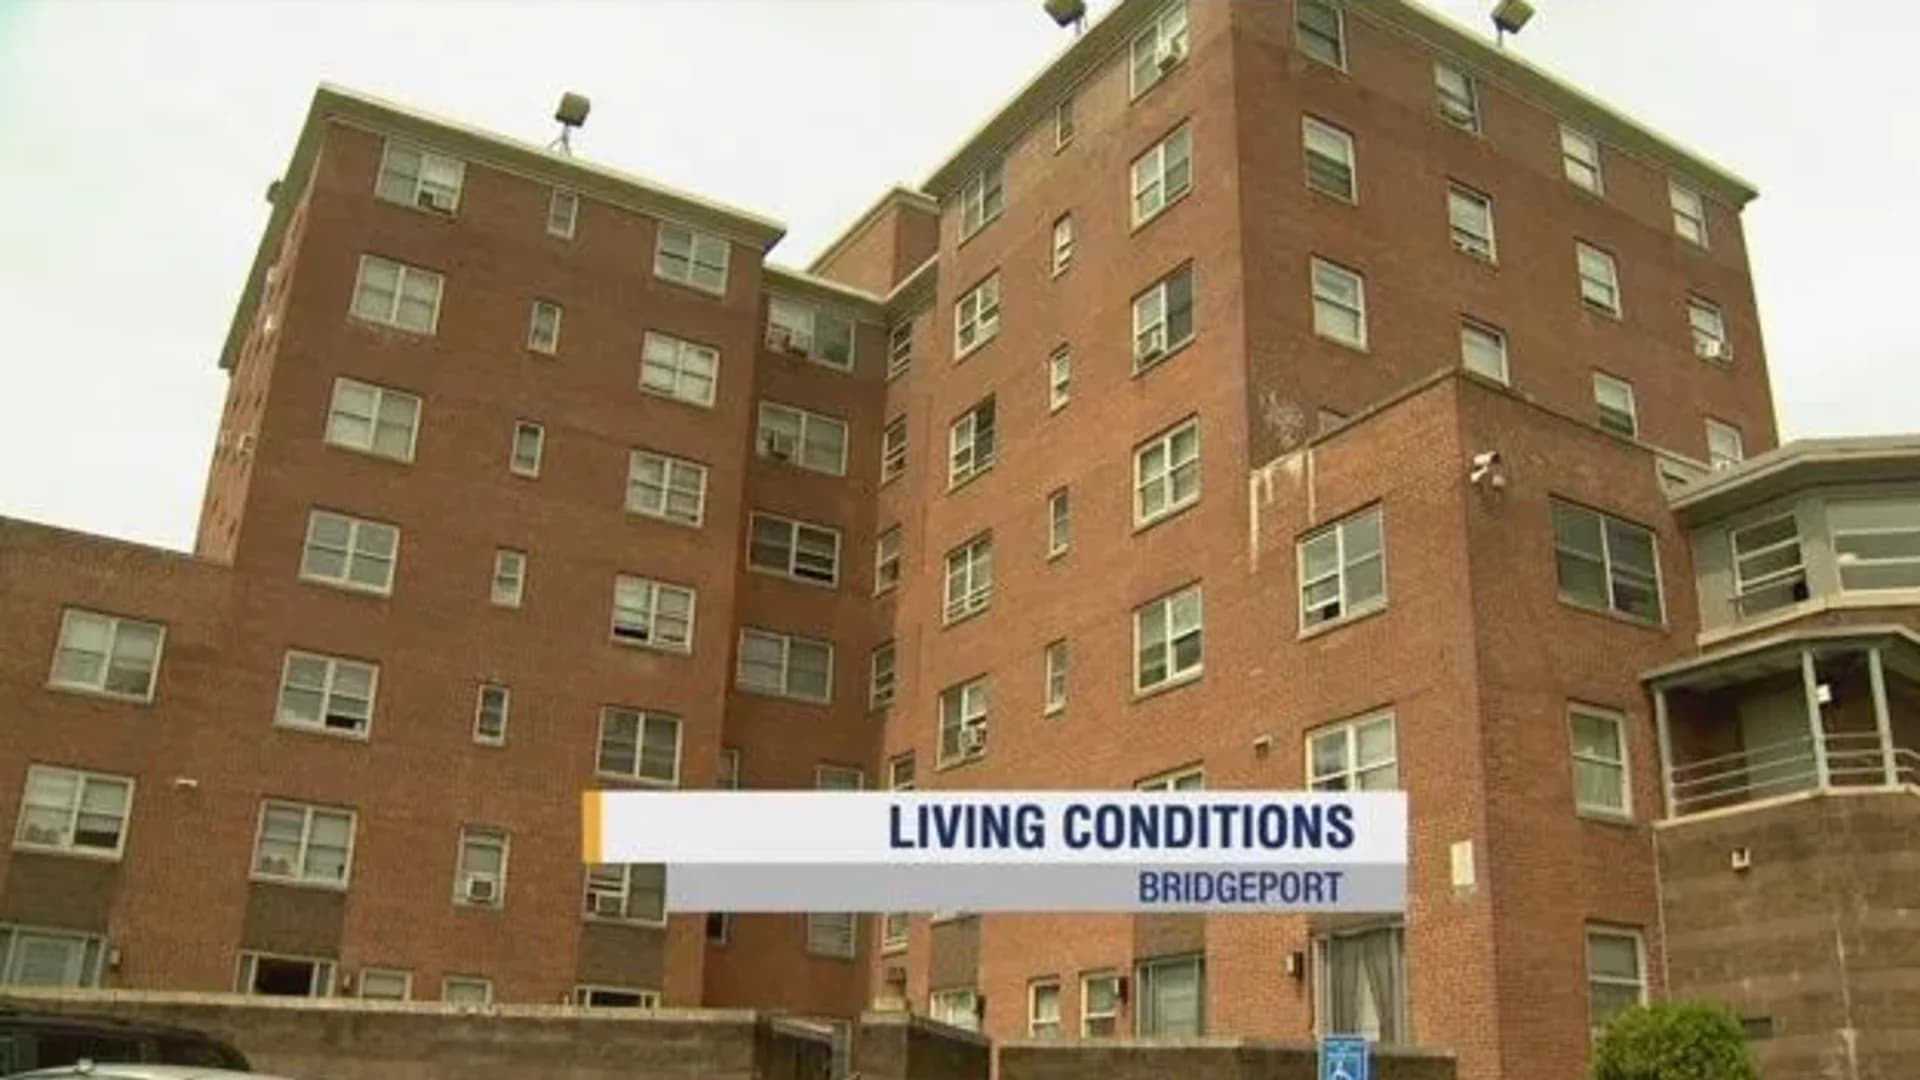 Bridgeport officials create federal report of conditions at Greene Homes Apartments